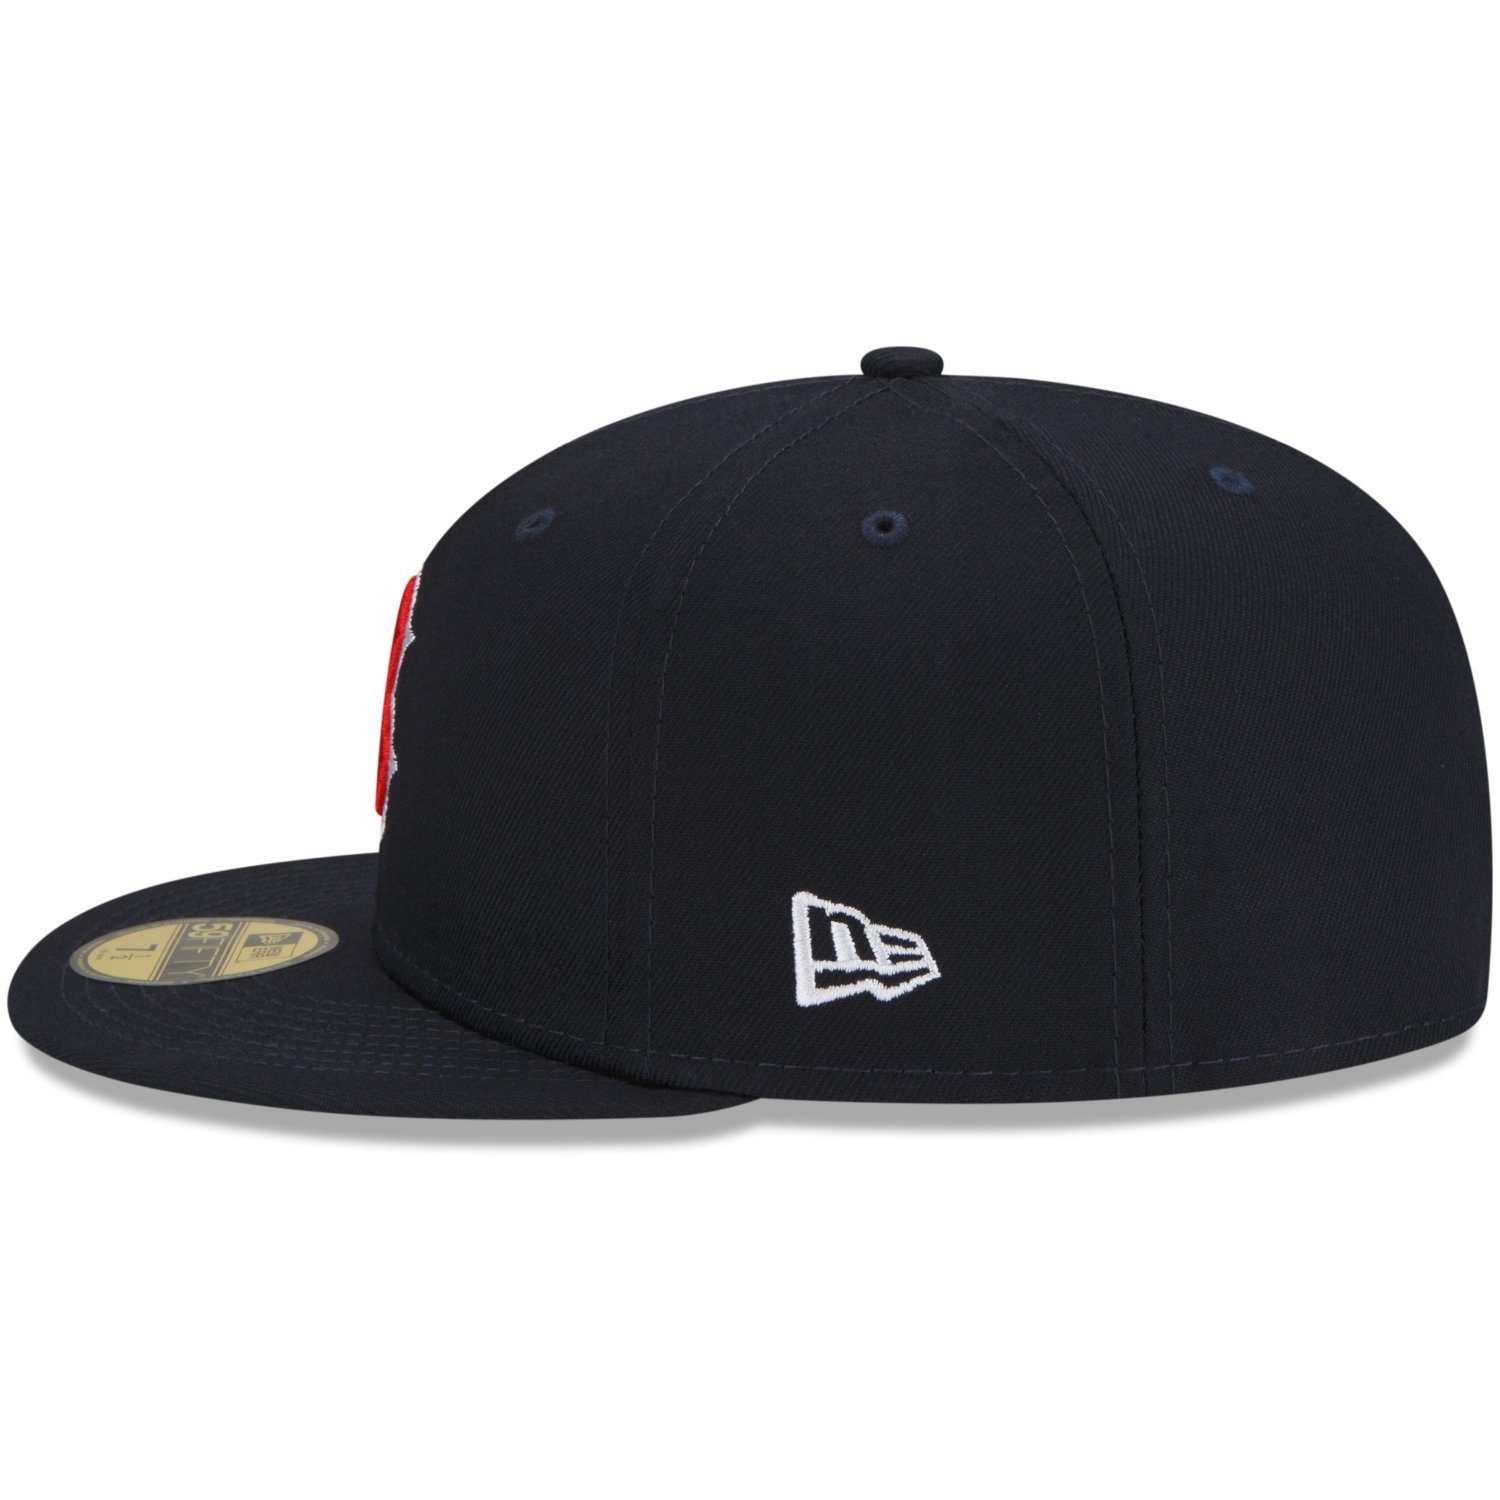 Red CITY CLUSTER Sox Era Fitted 59Fifty Cap New Boston